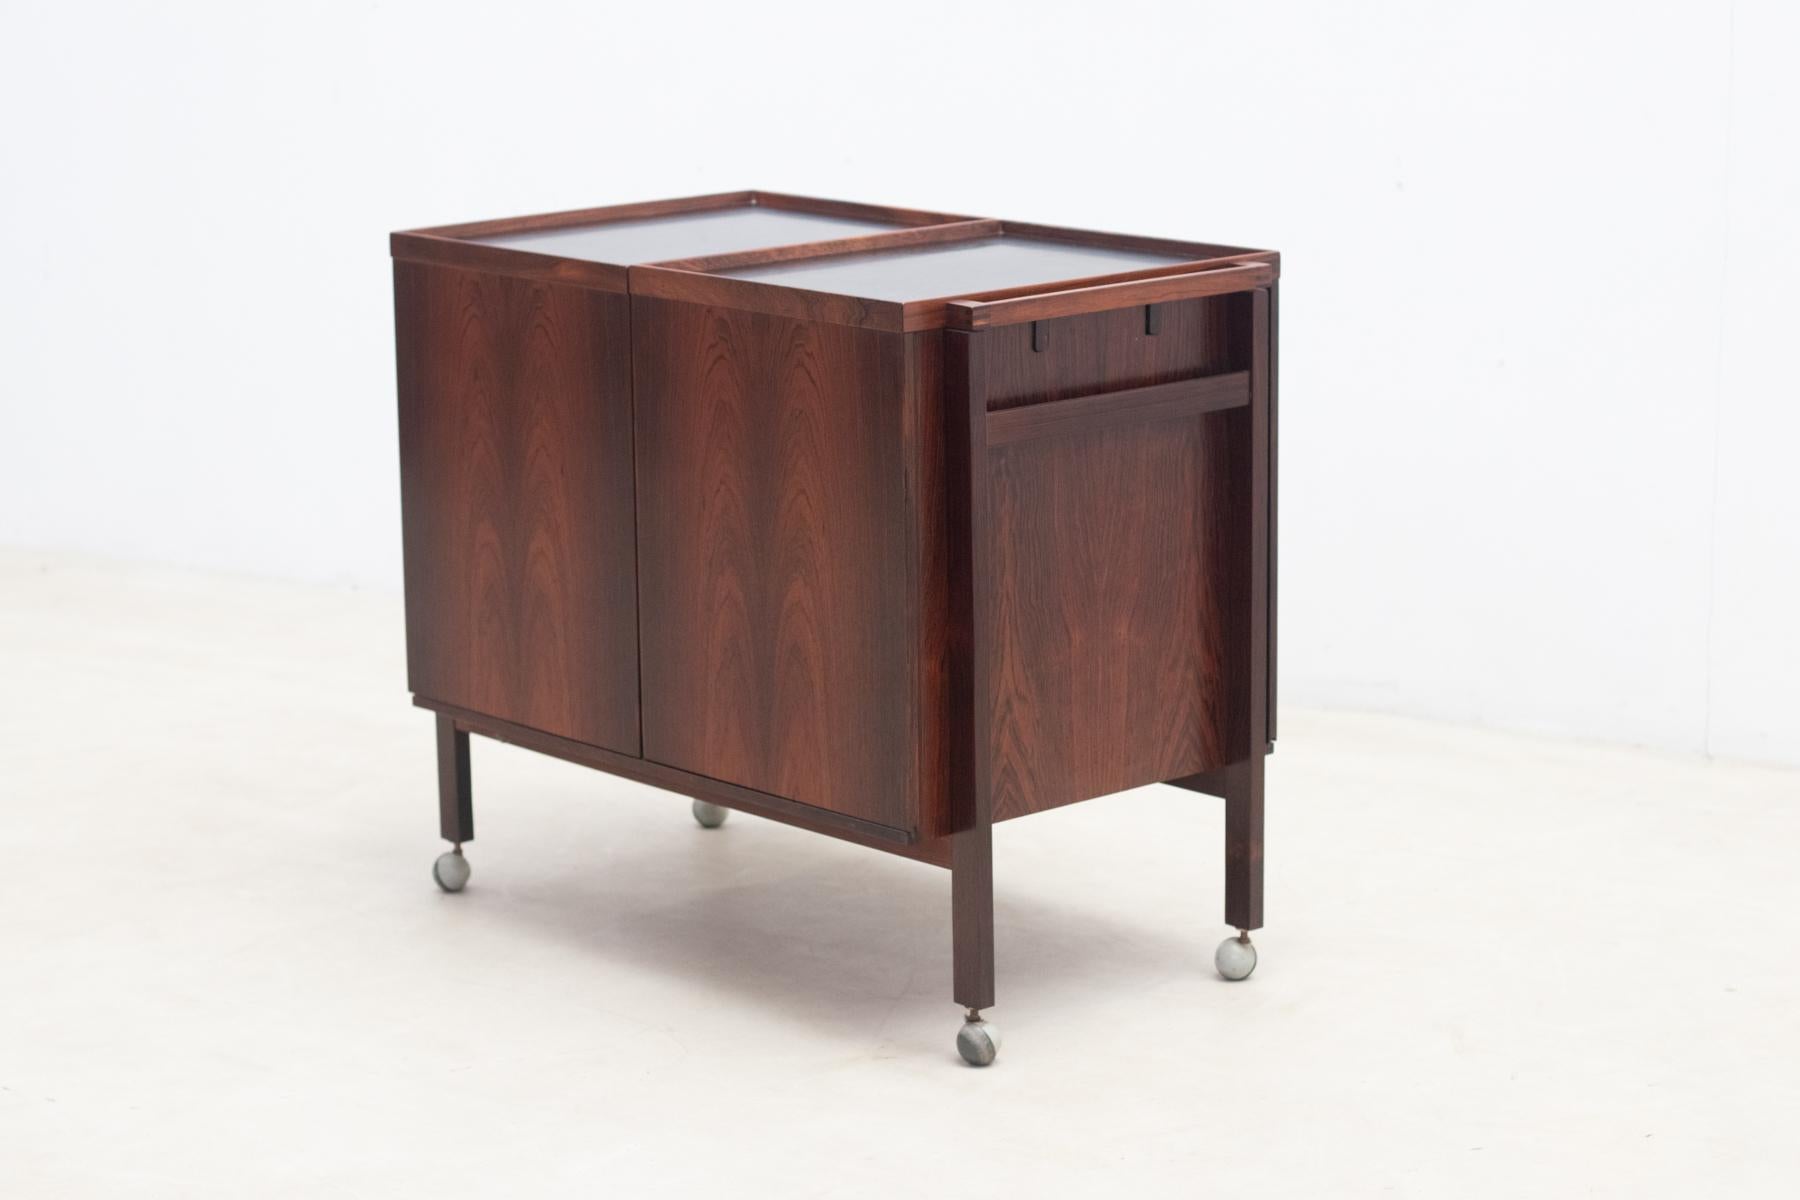 Mid-century rosewood expanding drinks trolley/bar cart, designed by Niels Erik & Glasdam Jensen for Vantinge Møbelindustri in Denmark during the 1960s,. 
The cart features a practical divided inset black laminate top and a discreet yet efficient